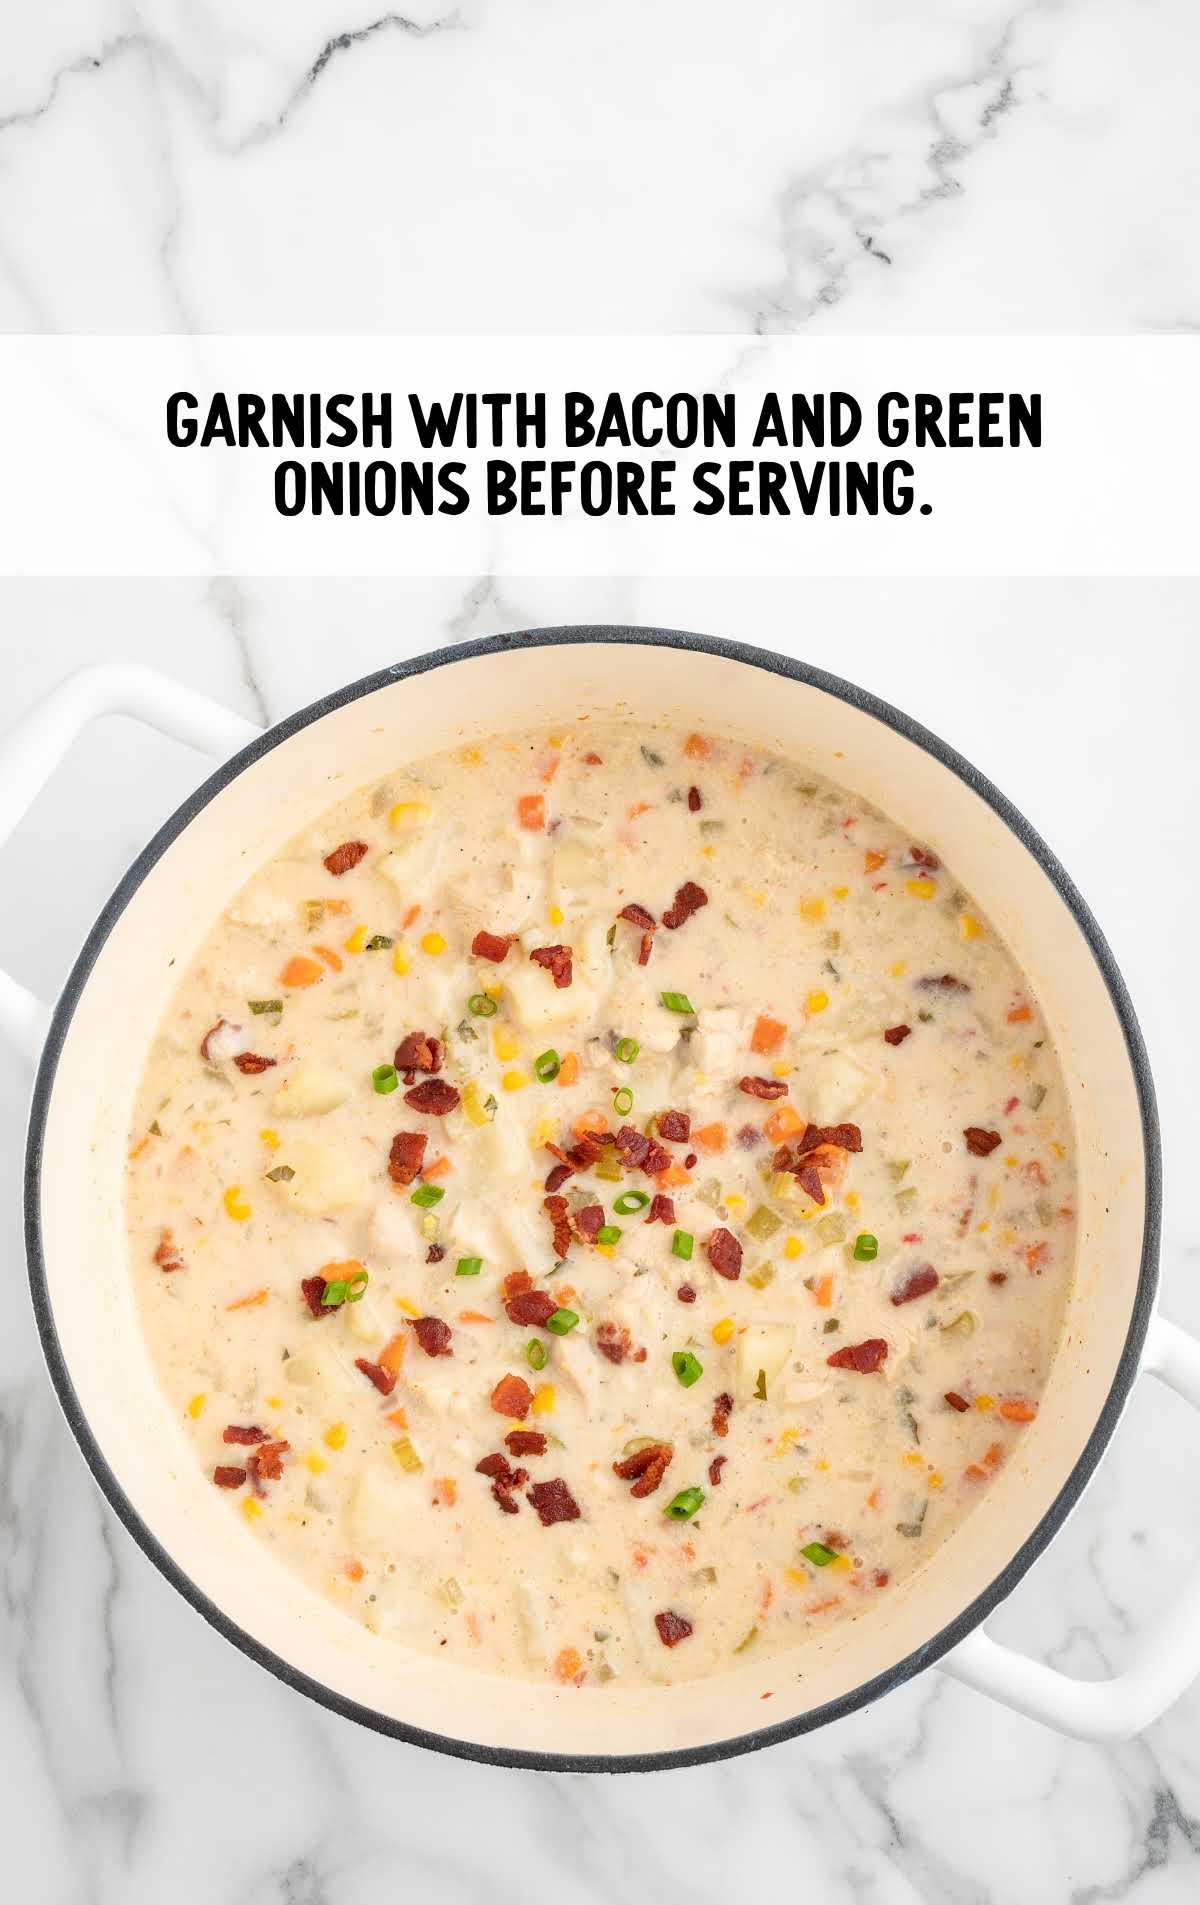 chowder garnished with bacon and green onions